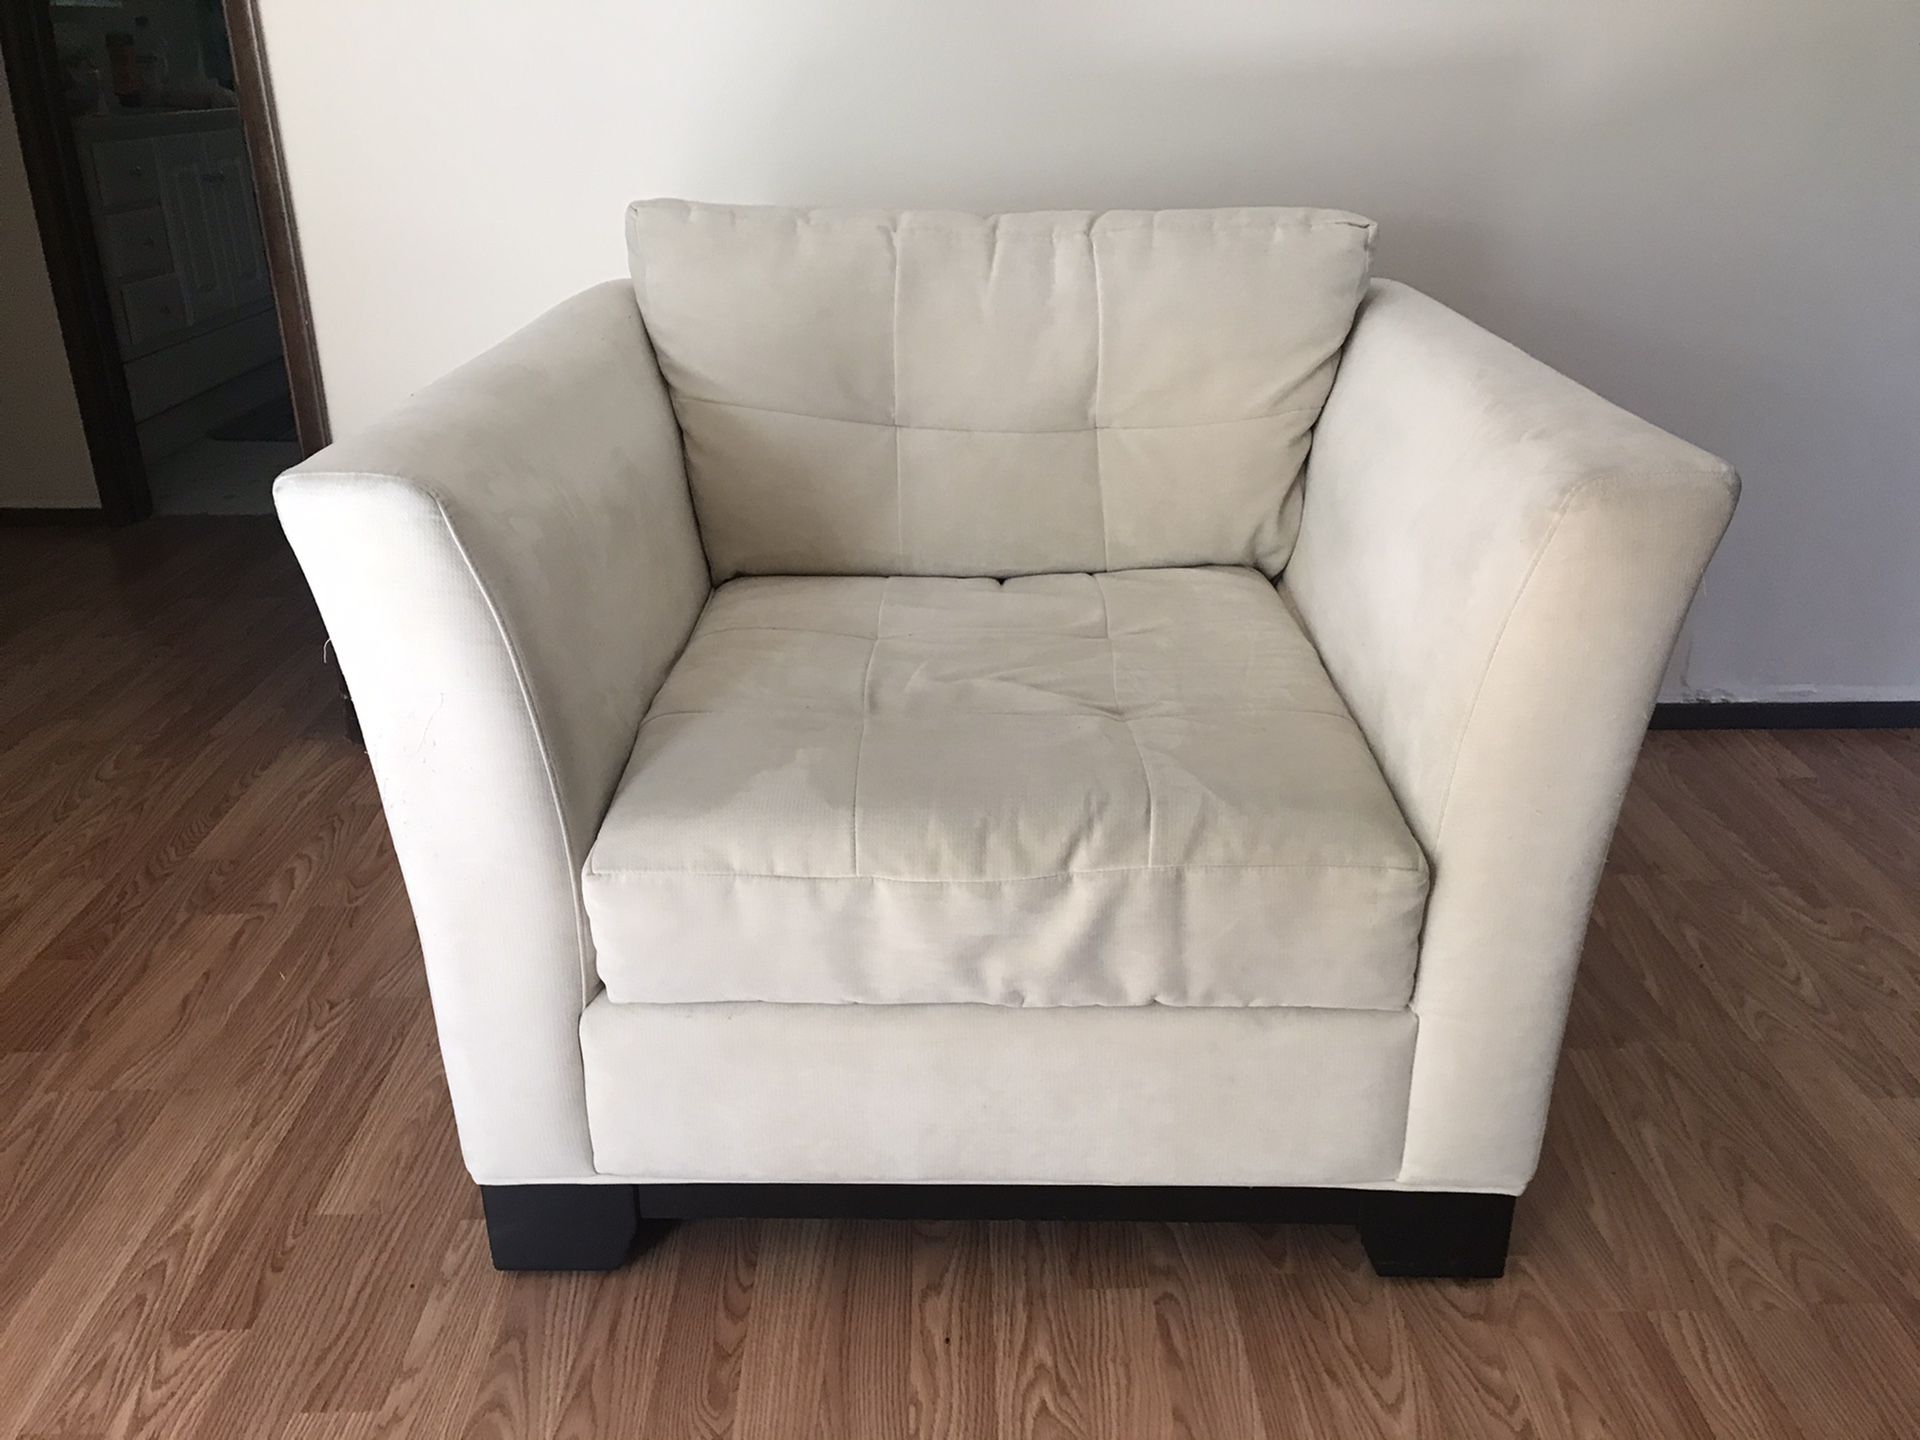 Free couch and sofa